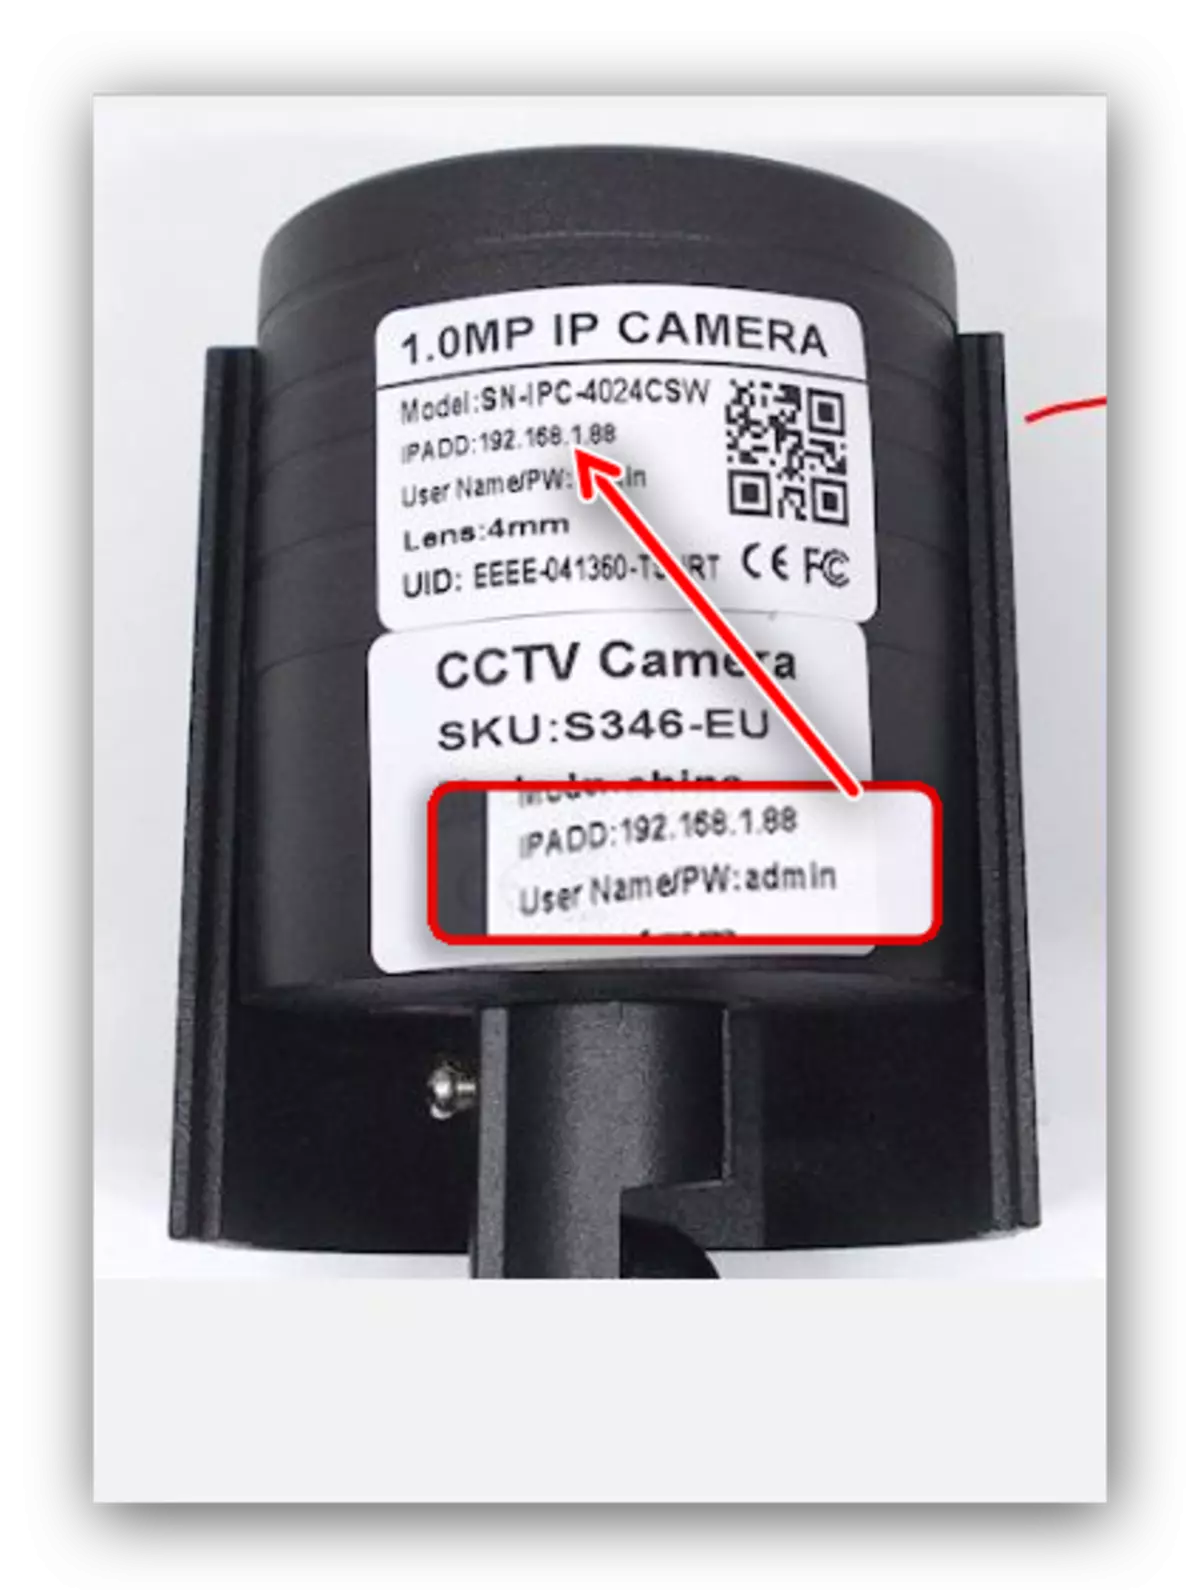 Find out the address to connect the IP camera through the router